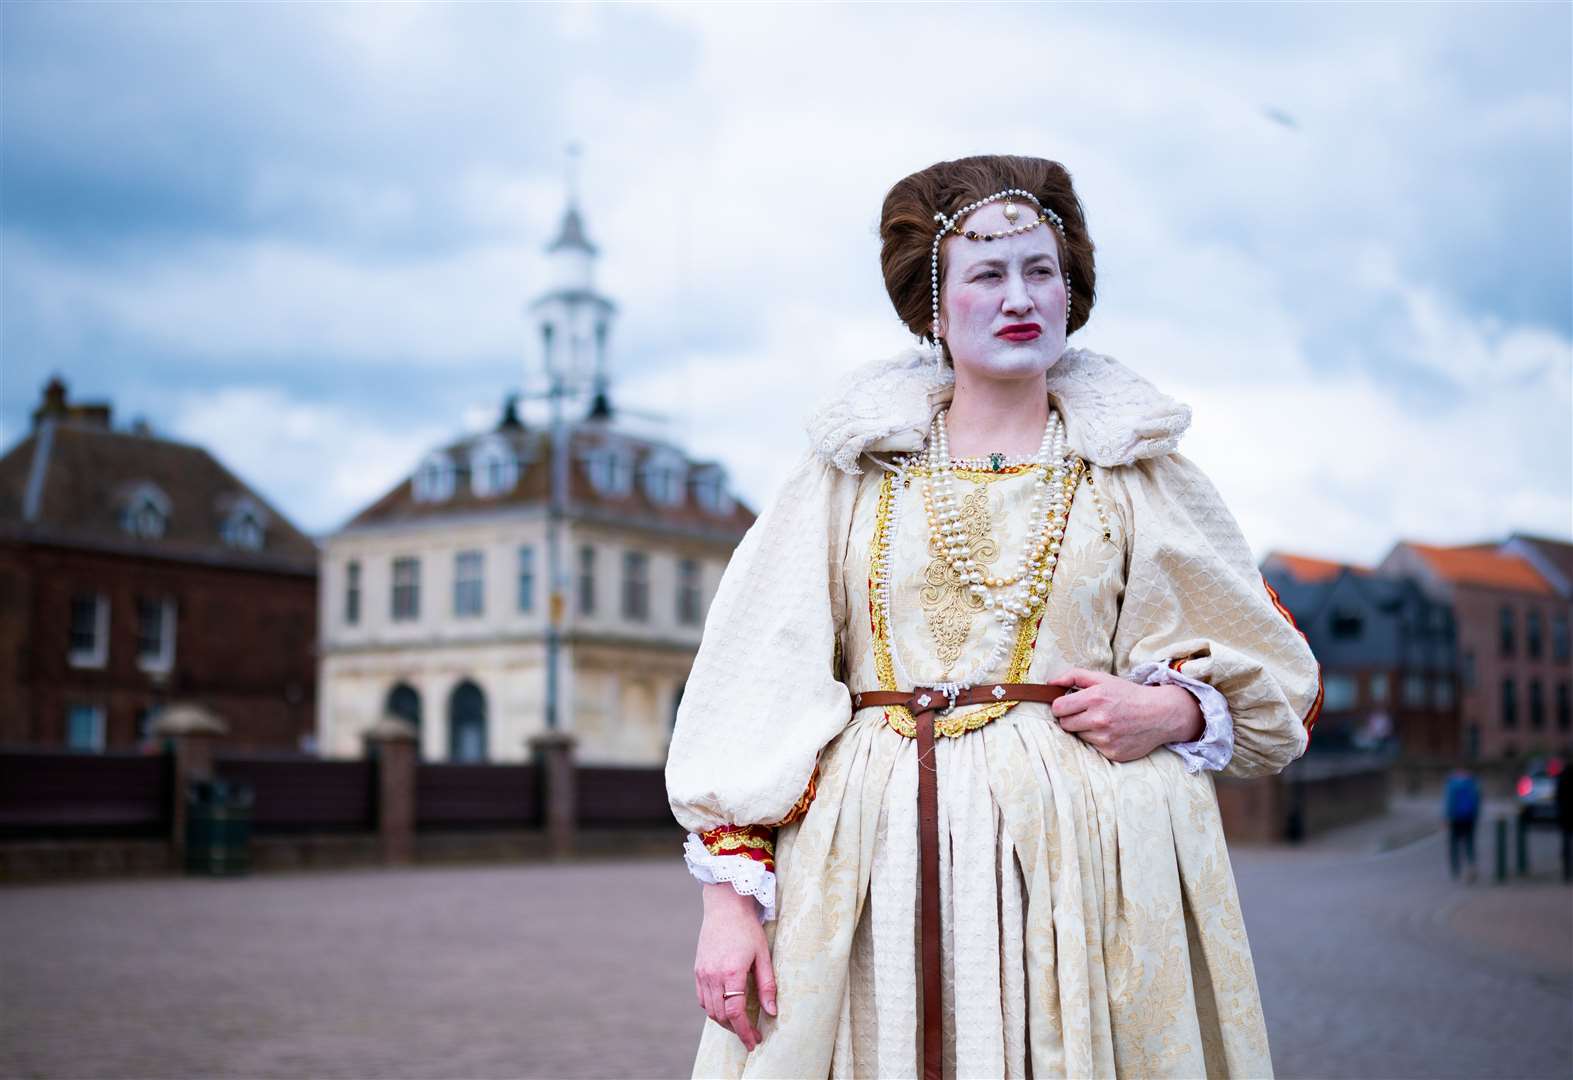 Visitors could take part in celebrating Shakespeare's birthday at St George's Guildhall